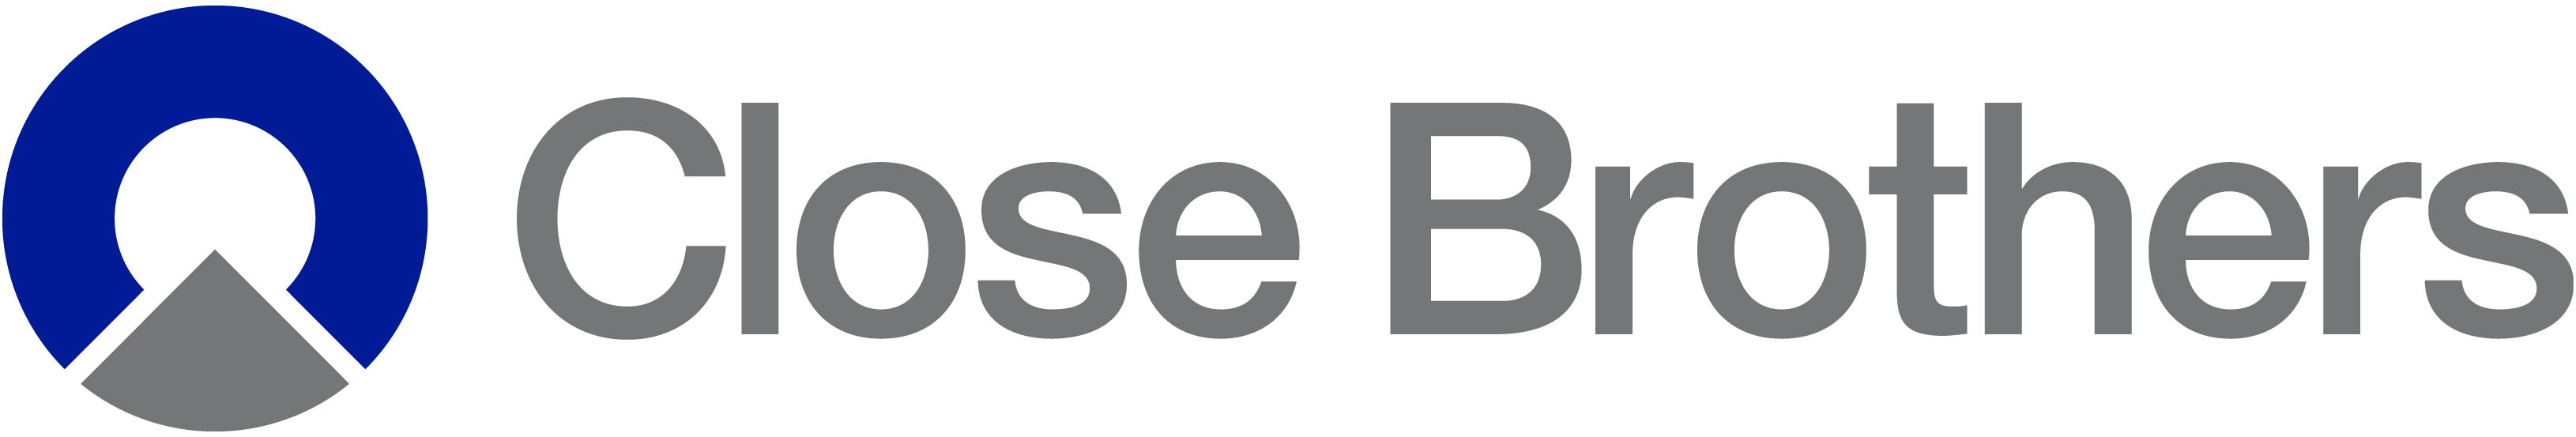 Close Brothers Group Brand Logo